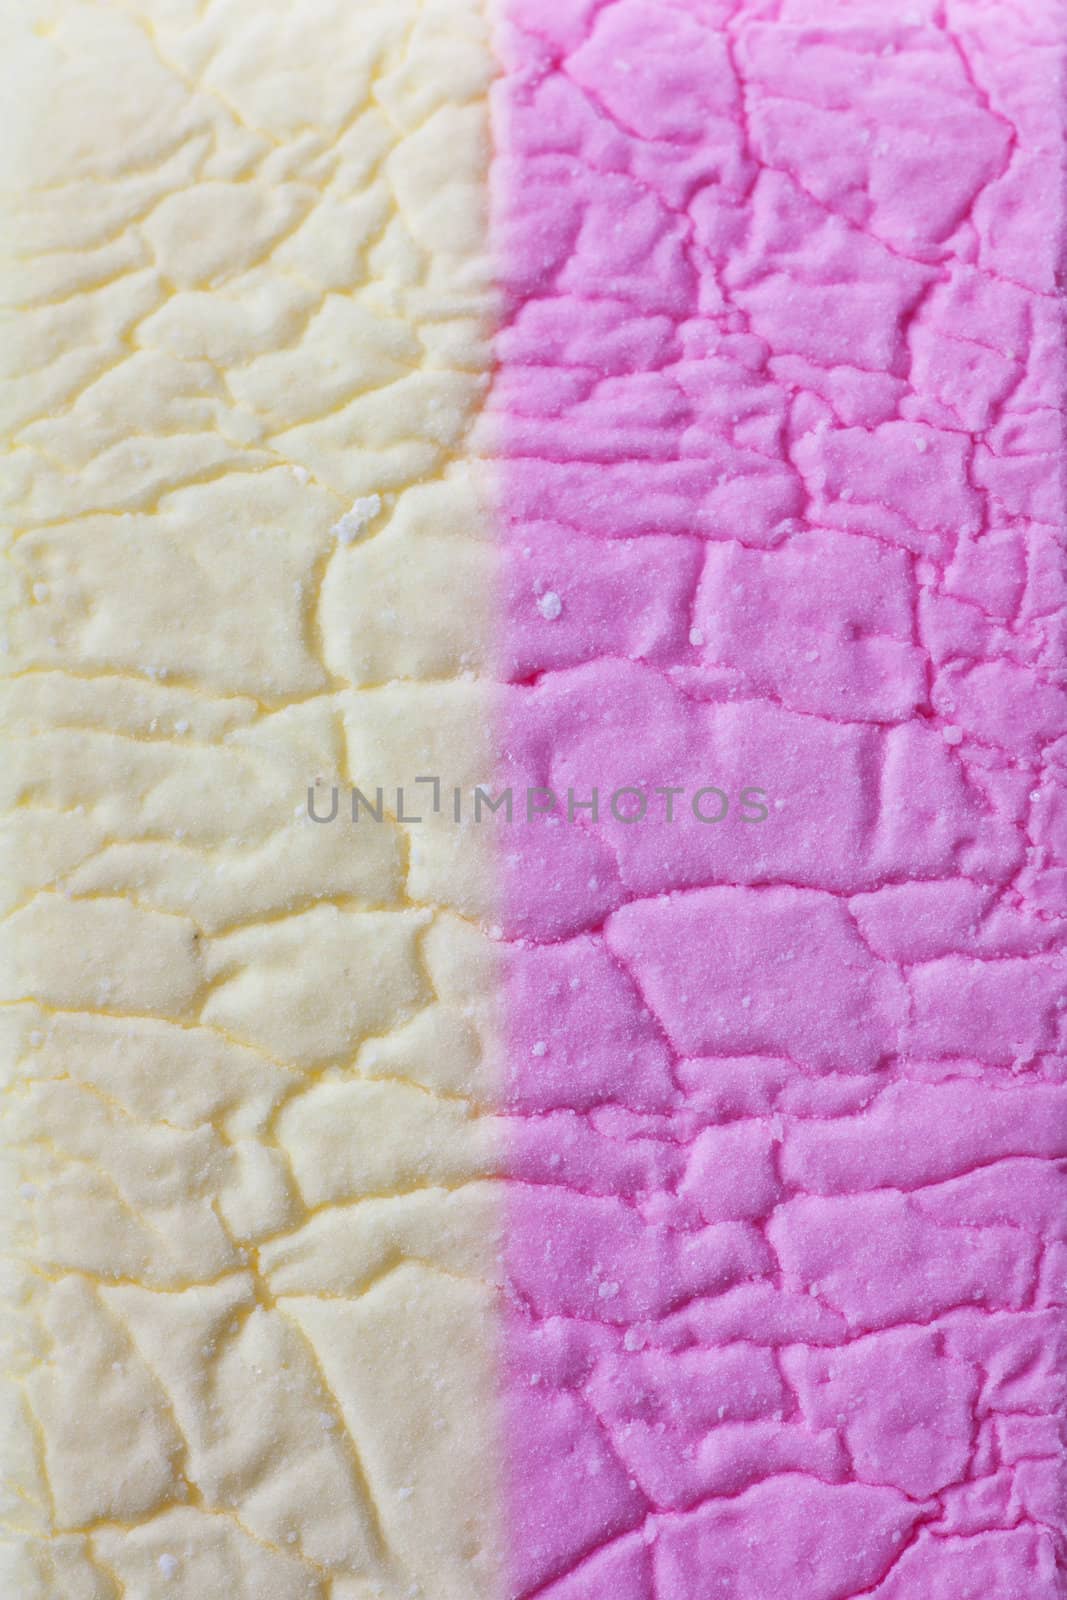 Closeup view of a marhmallow. Colorful background